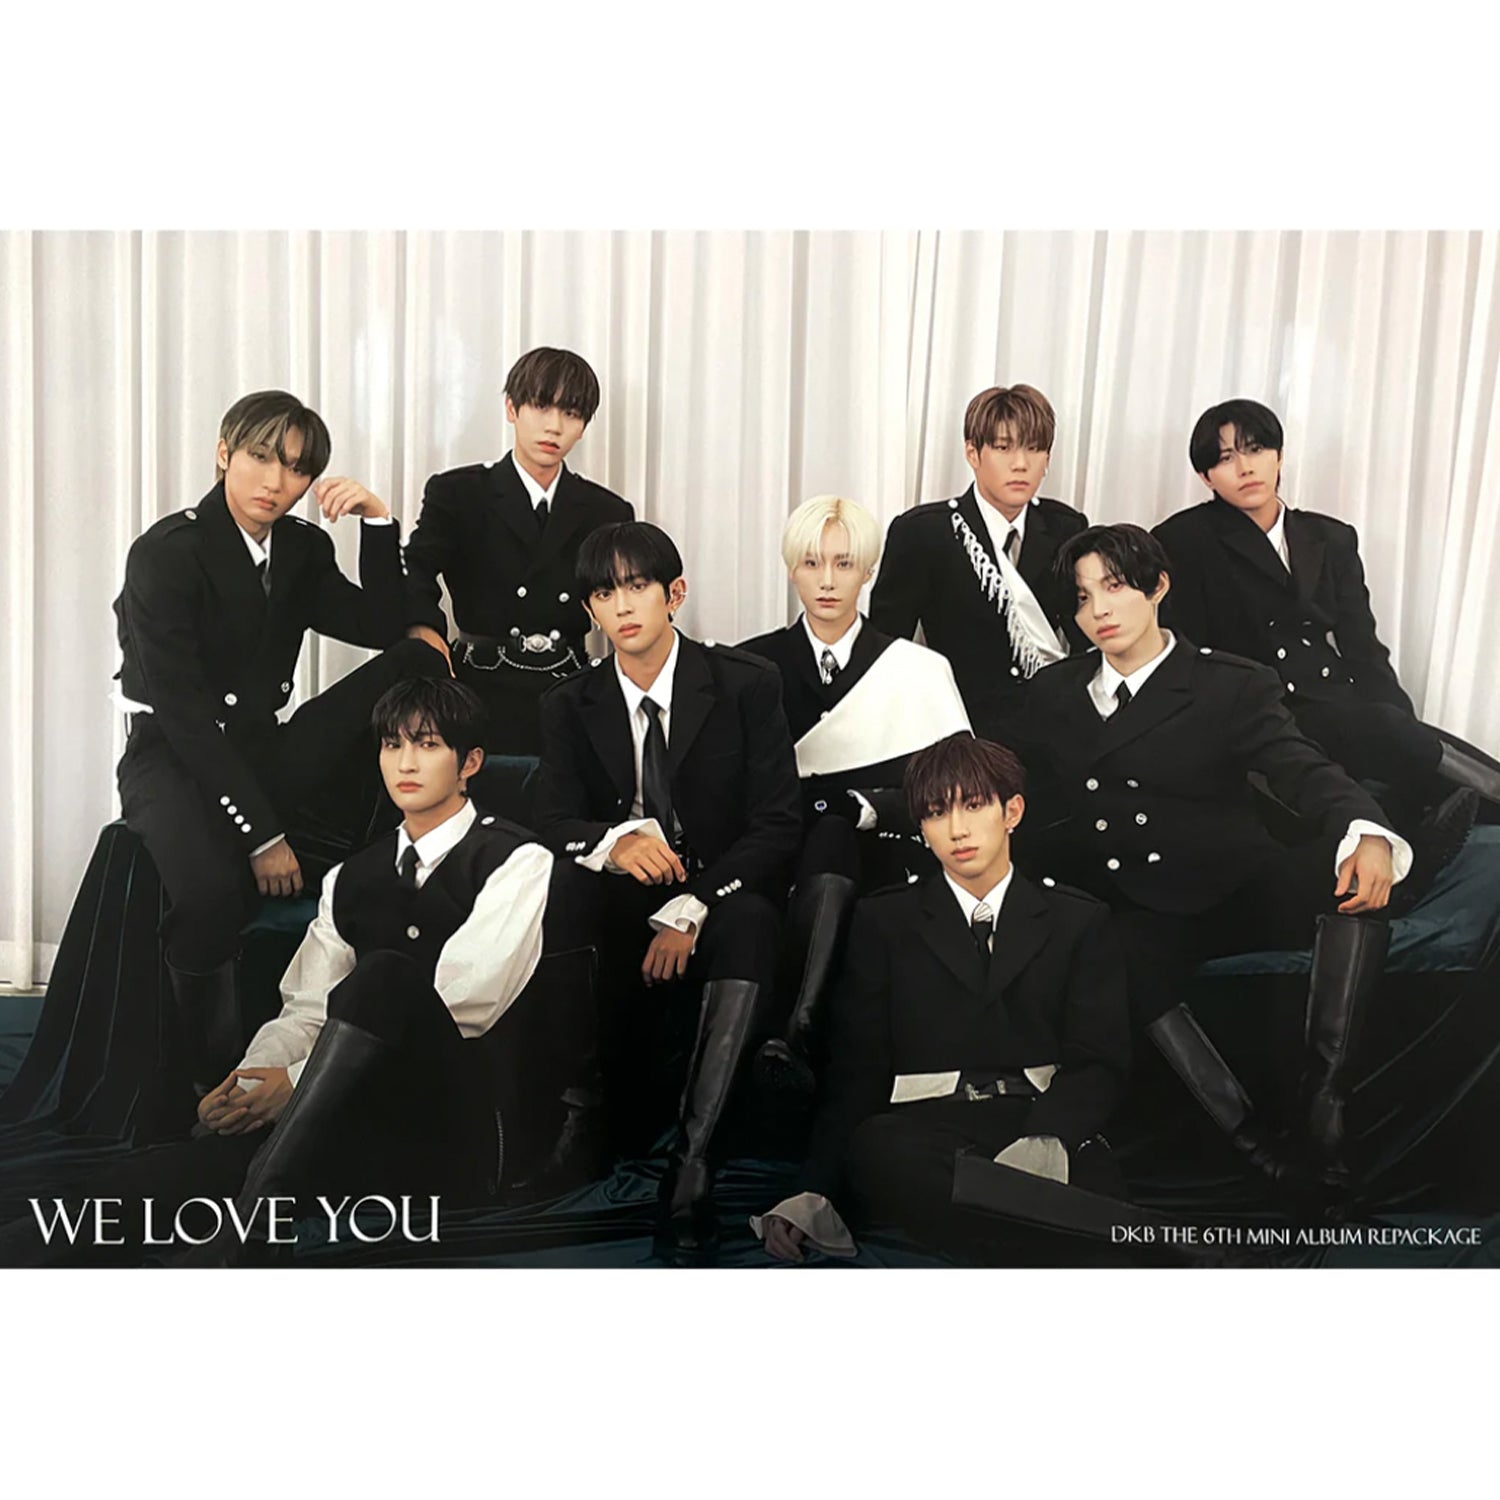 DKB 6TH MINI ALBUM REPACKAGE 'WE LOVE YOU' POSTER ONLY NIGHT VERSION COVER